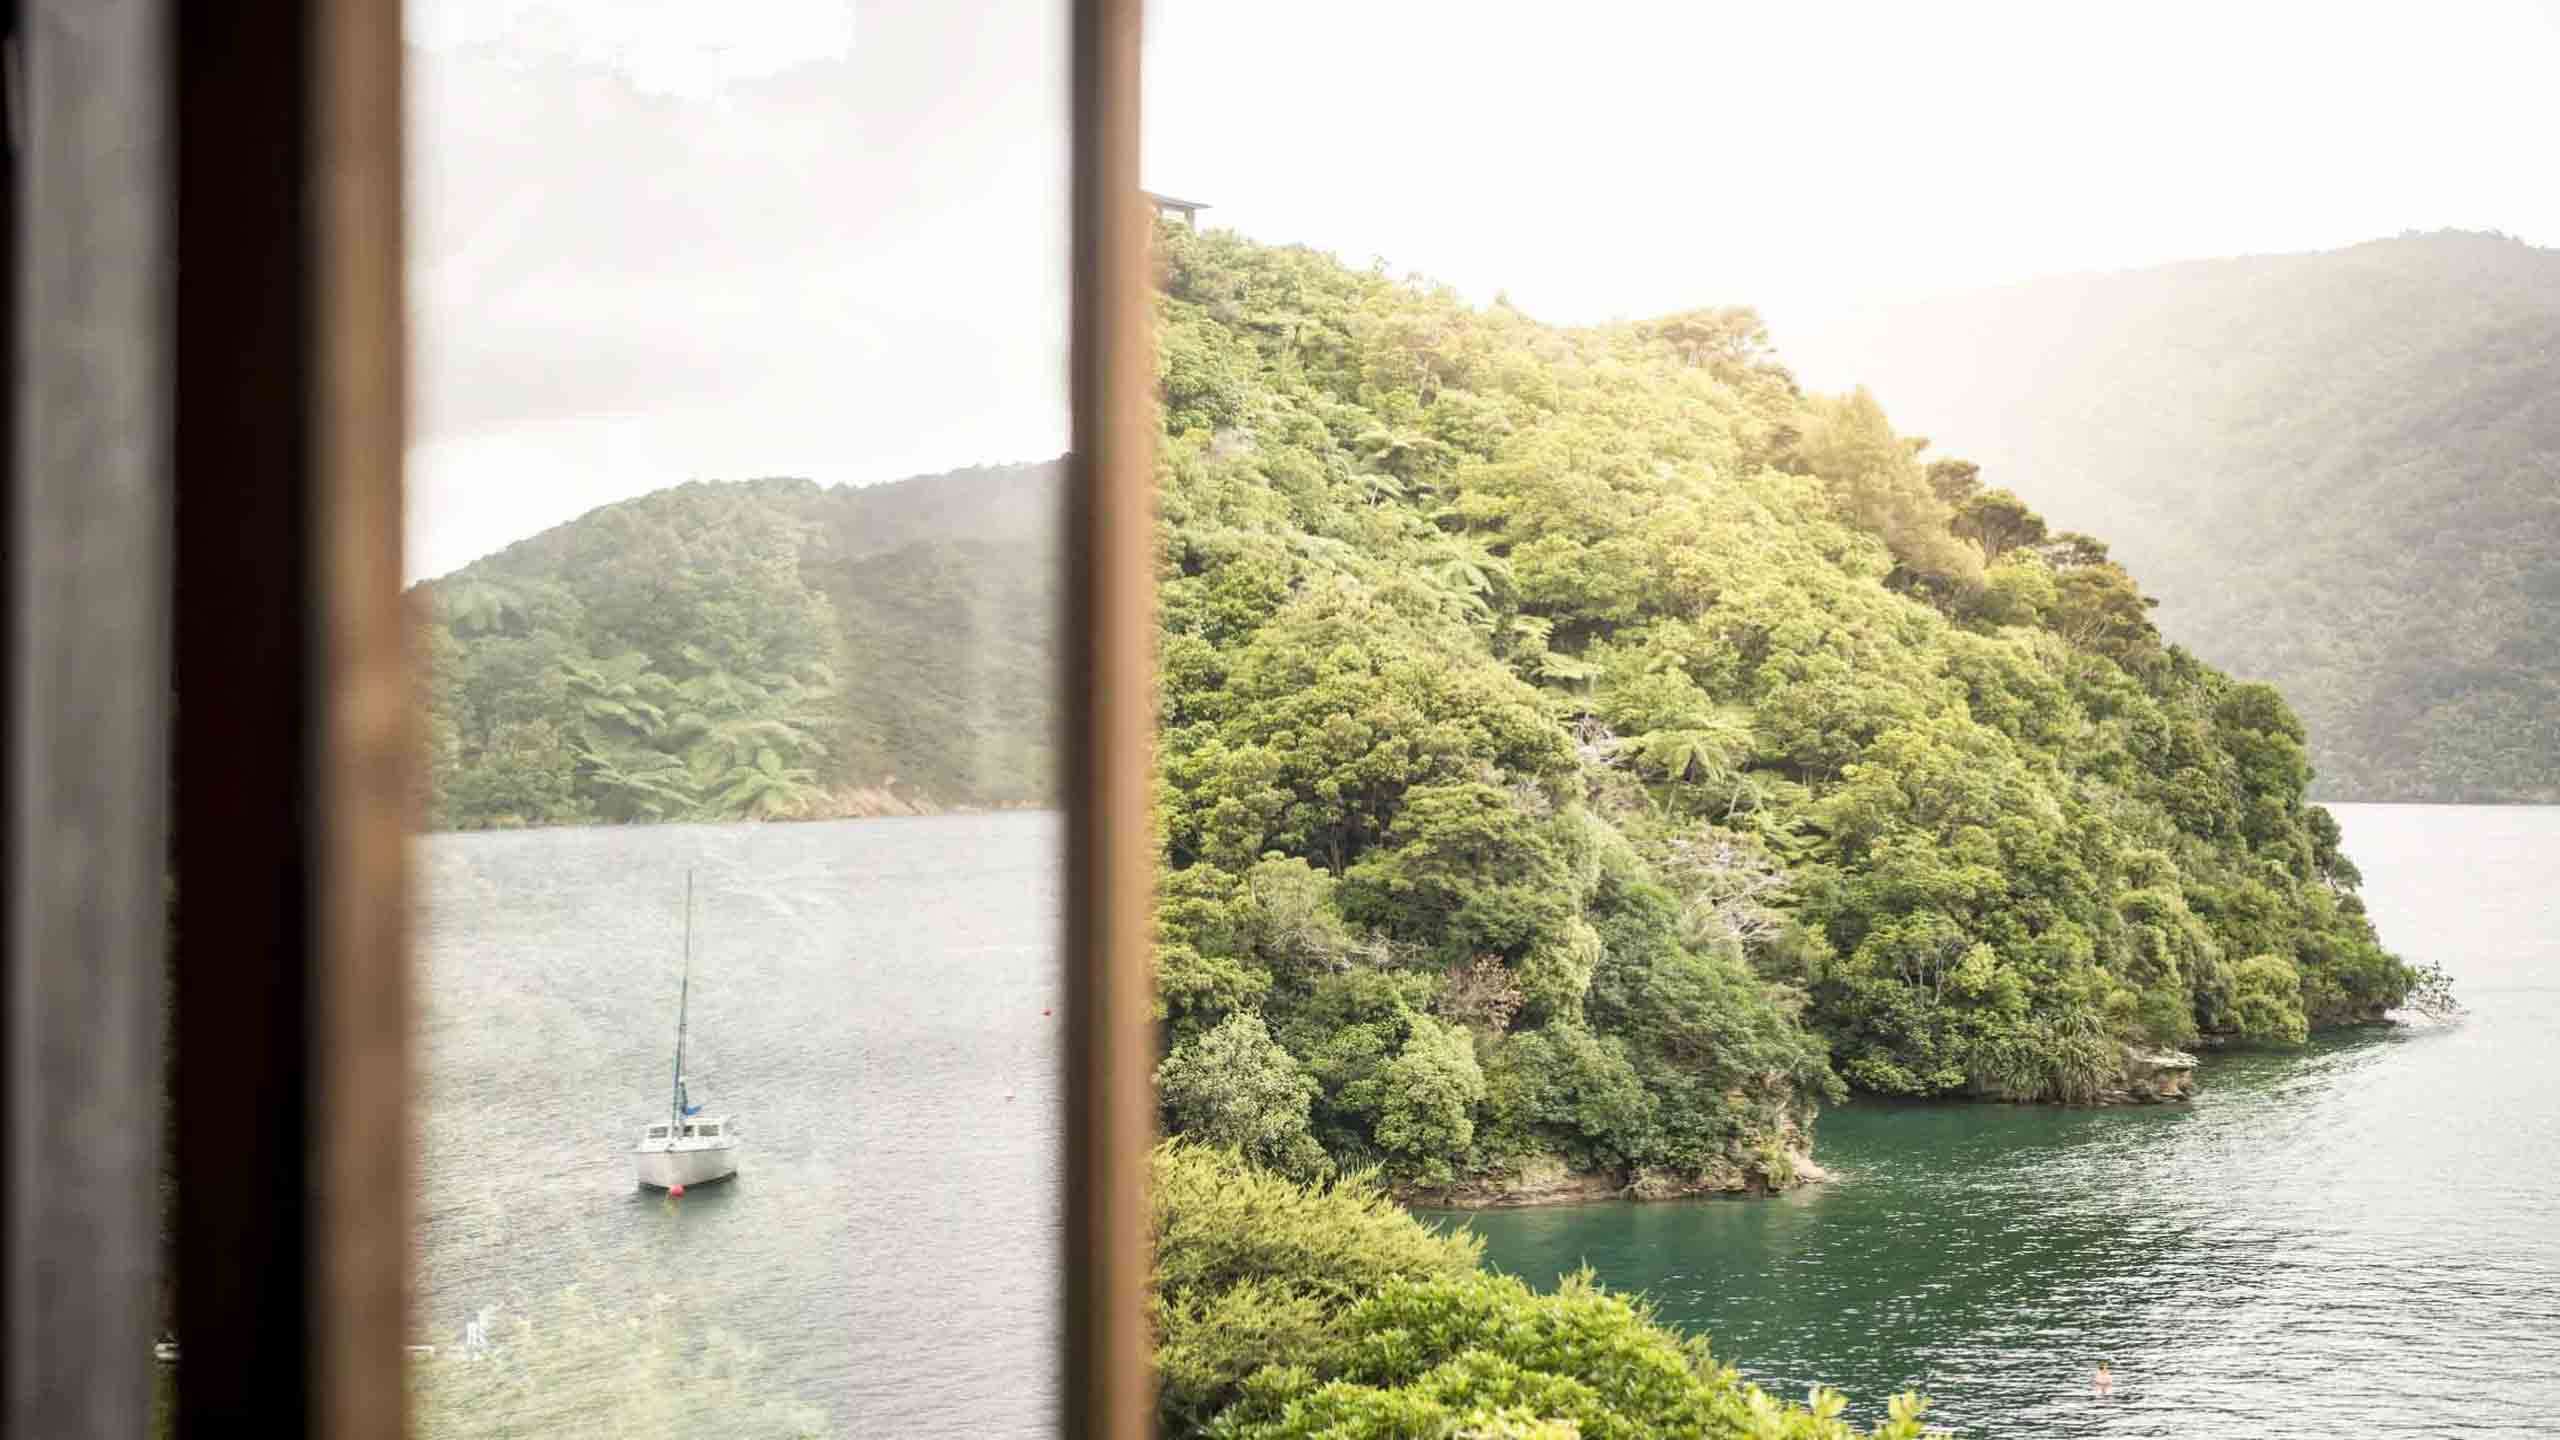 The Ultimate Luxury Queen Charlotte Track Walk 4D3N (Stay at Bay of Many Coves), Private Guided